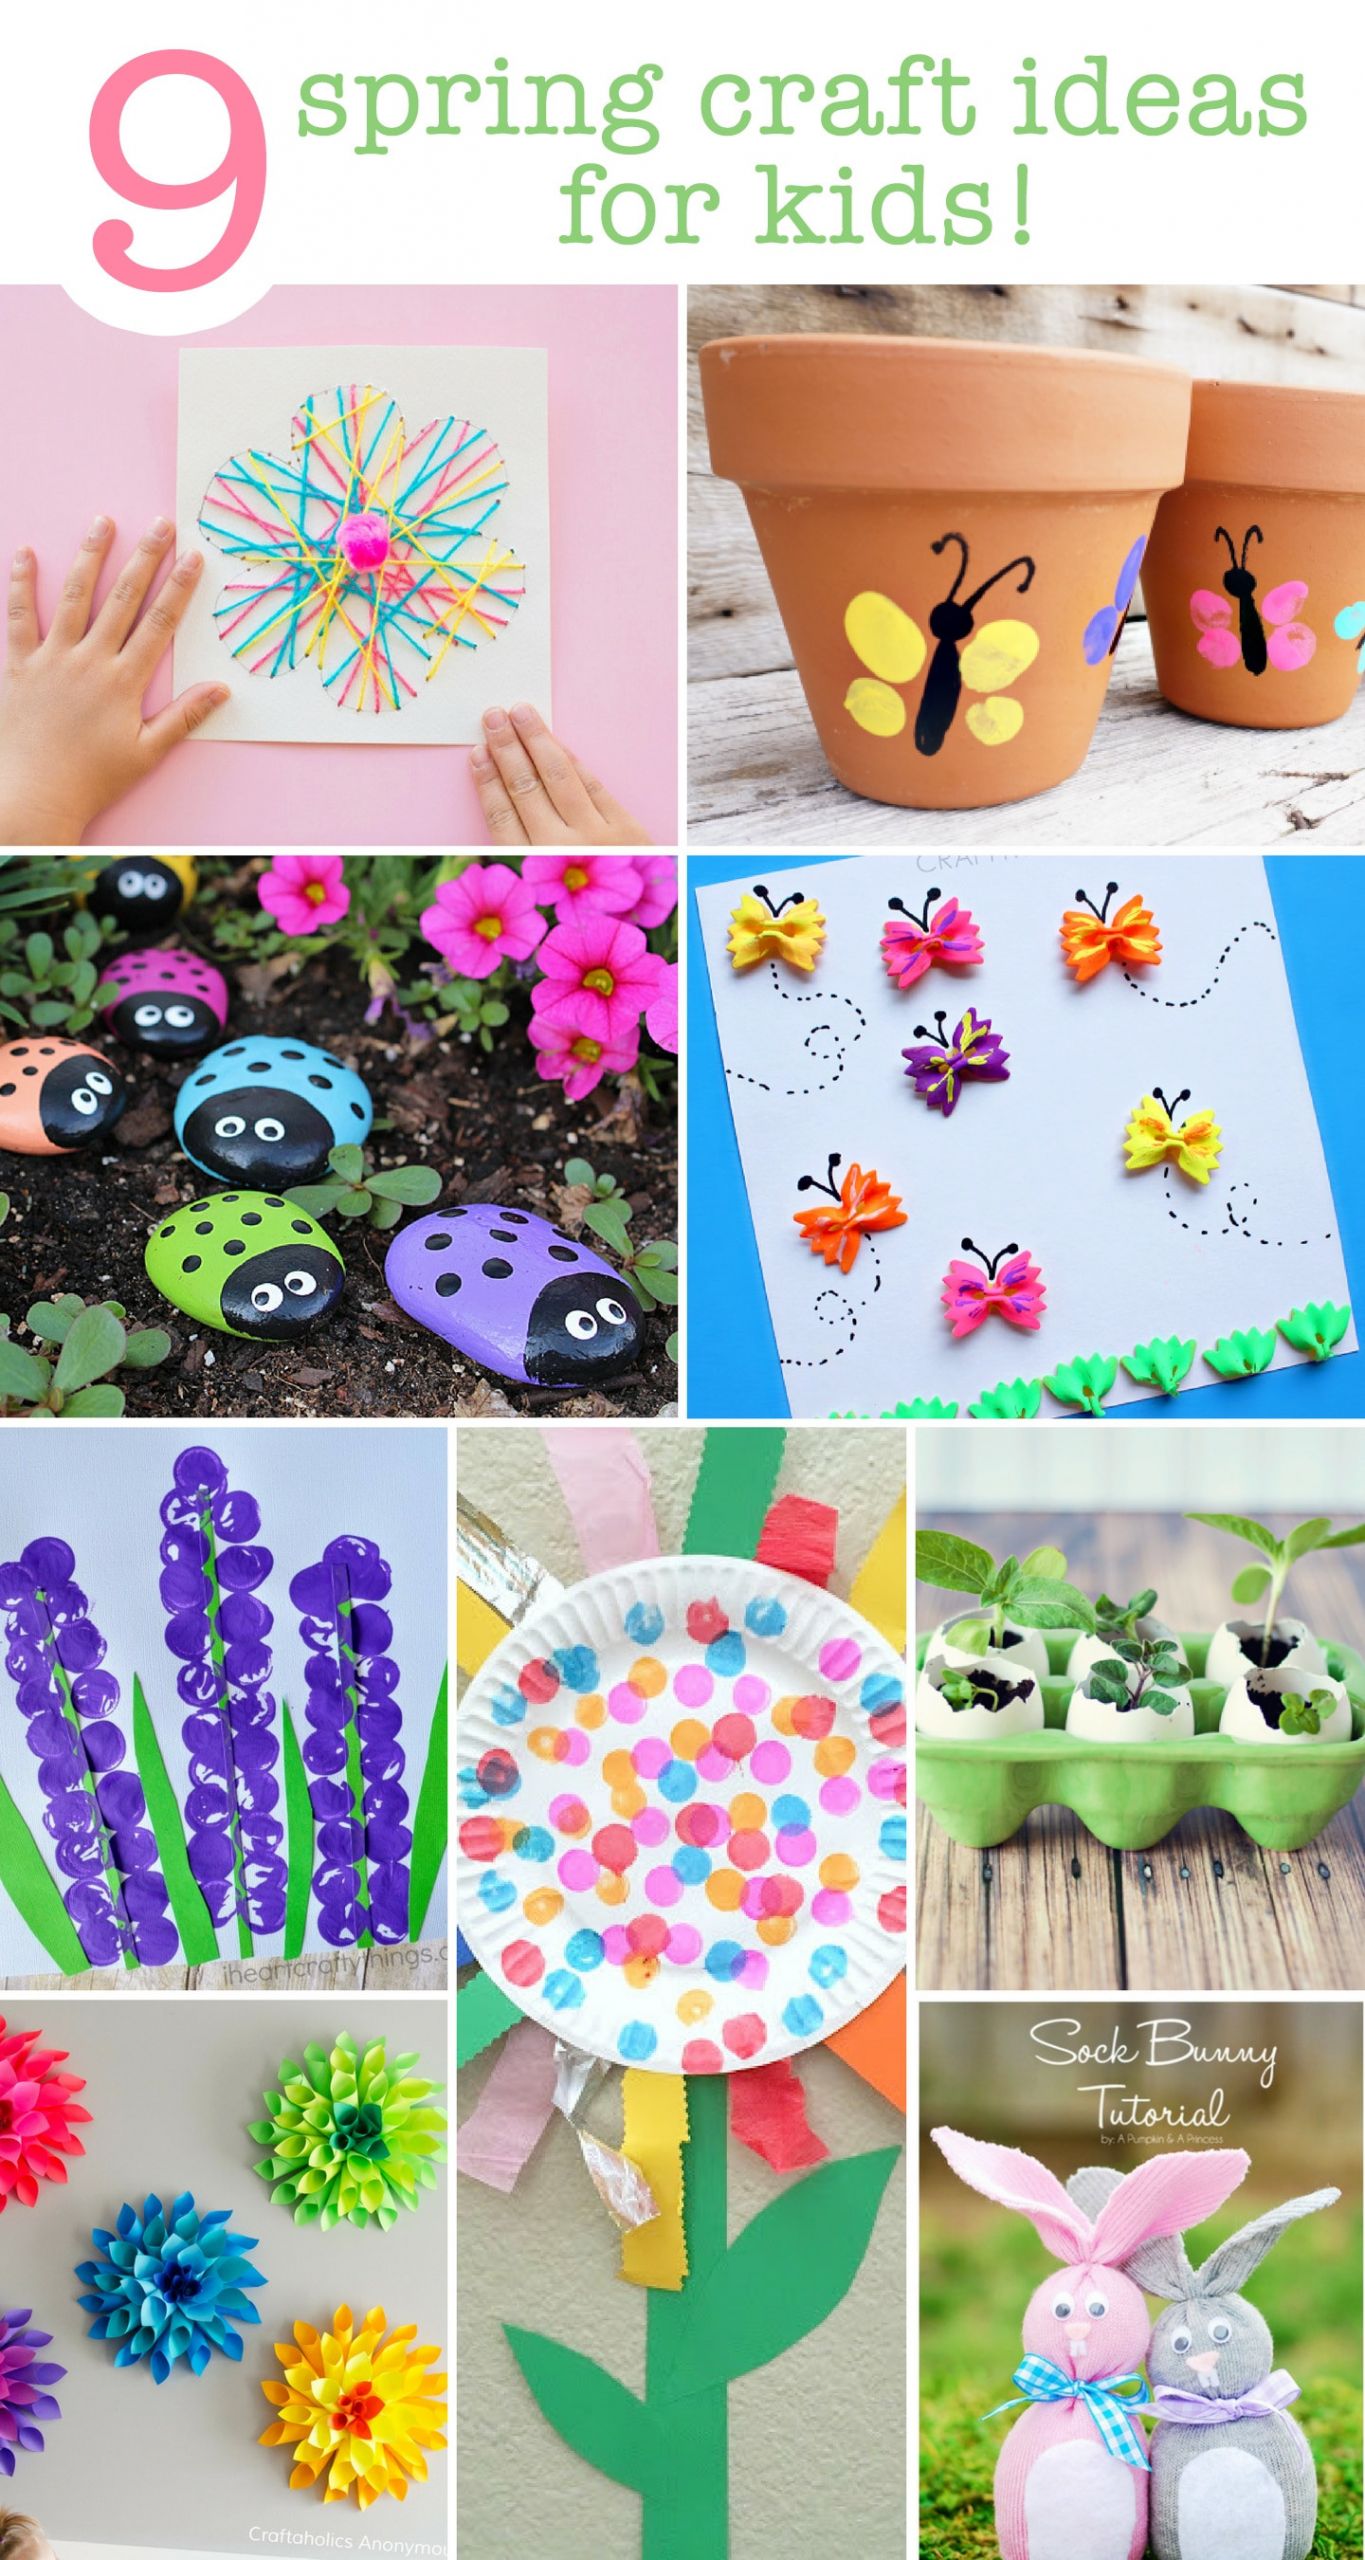 Free Craft Ideas For Kids
 9 Spring Craft Ideas For The Kids